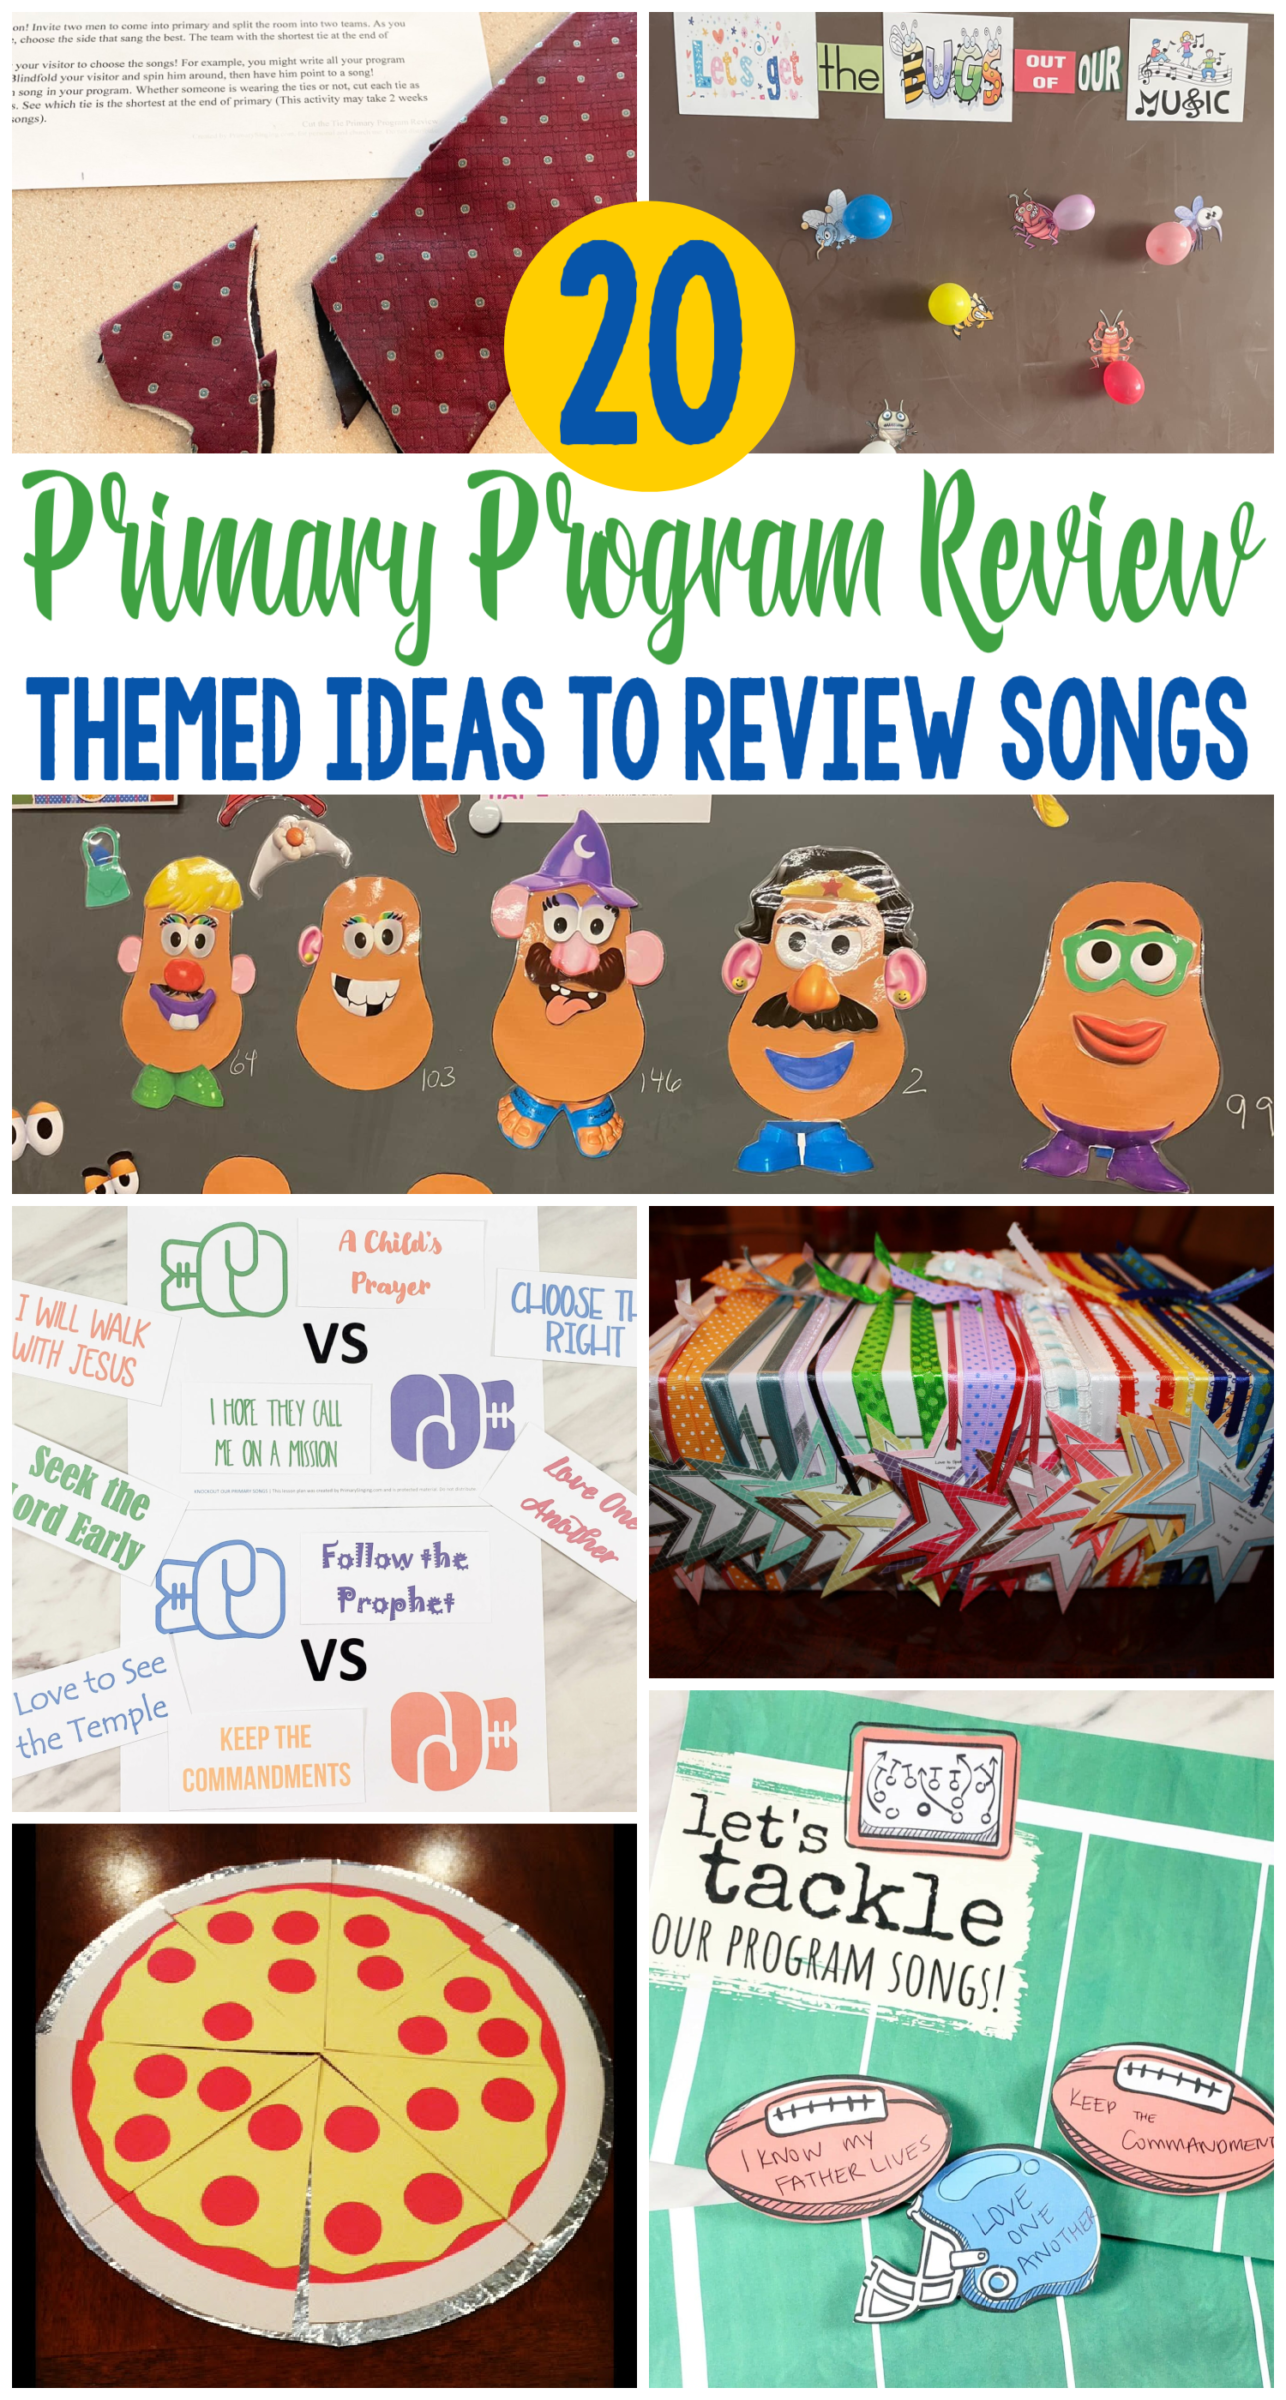 20 Primary Program Review Ideas & Themes for a fun way to review all of your Primary program songs before the presentation! Cute themes to earn a treat, include the Bishopric, or work on specific parts of the song. Singing Time ideas for LDS Primary Music Leaders.